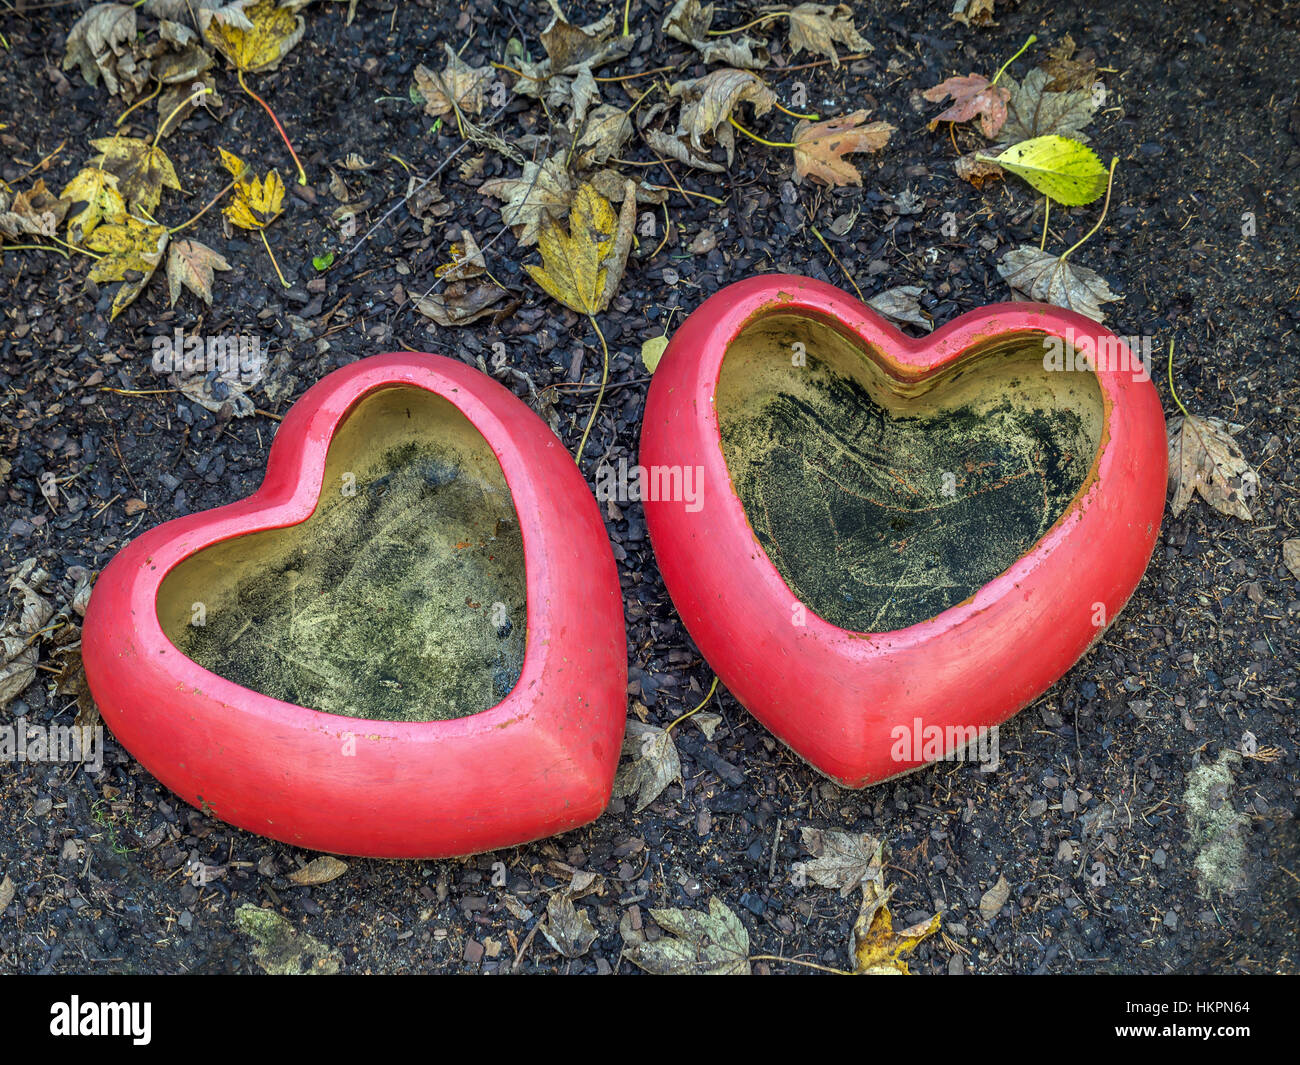 Two red heart-shaped flowerpots placed in the garden Stock Photo